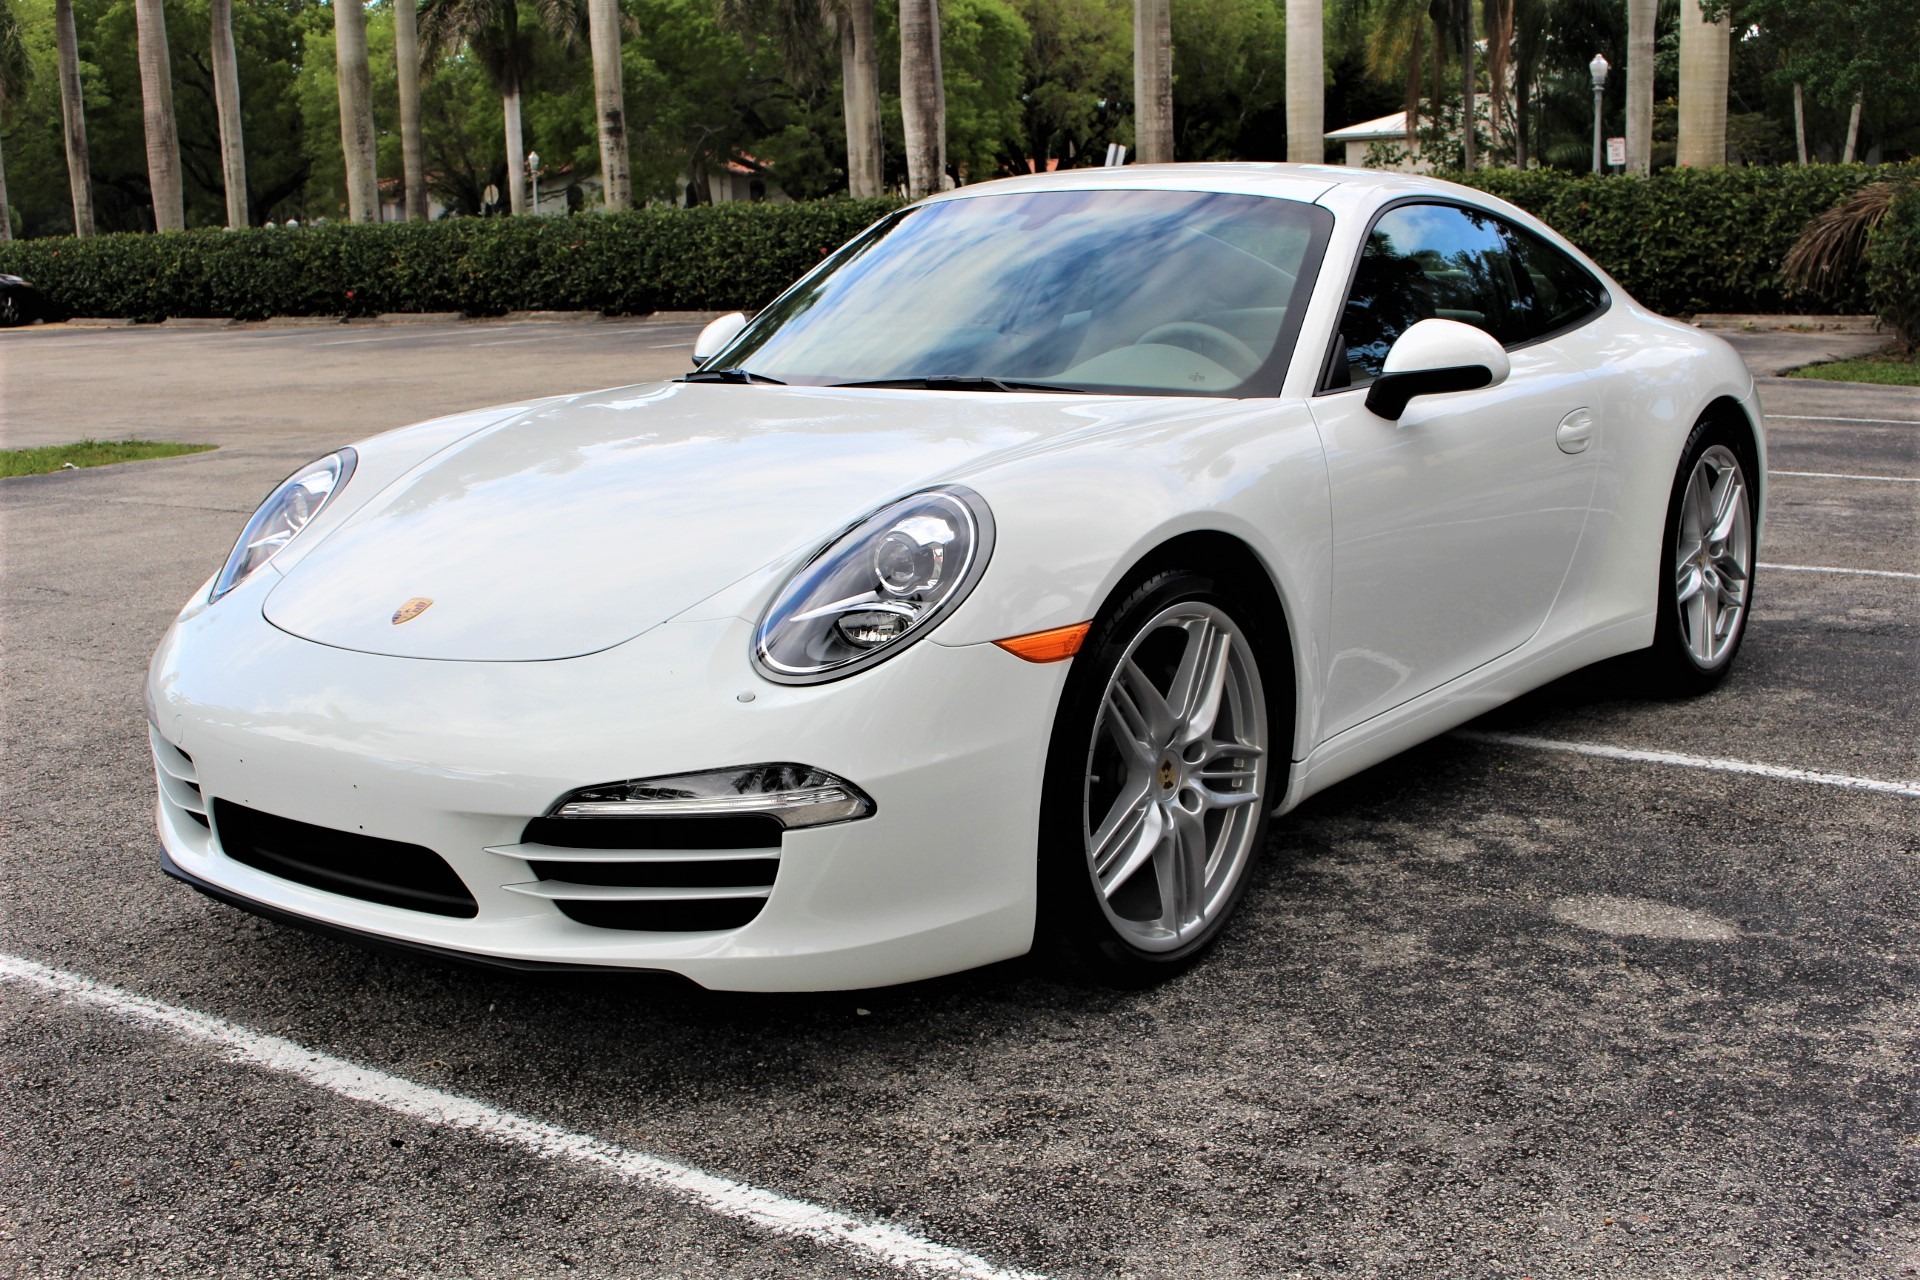 Used 2013 Porsche 911 Carrera for sale Sold at The Gables Sports Cars in Miami FL 33146 4